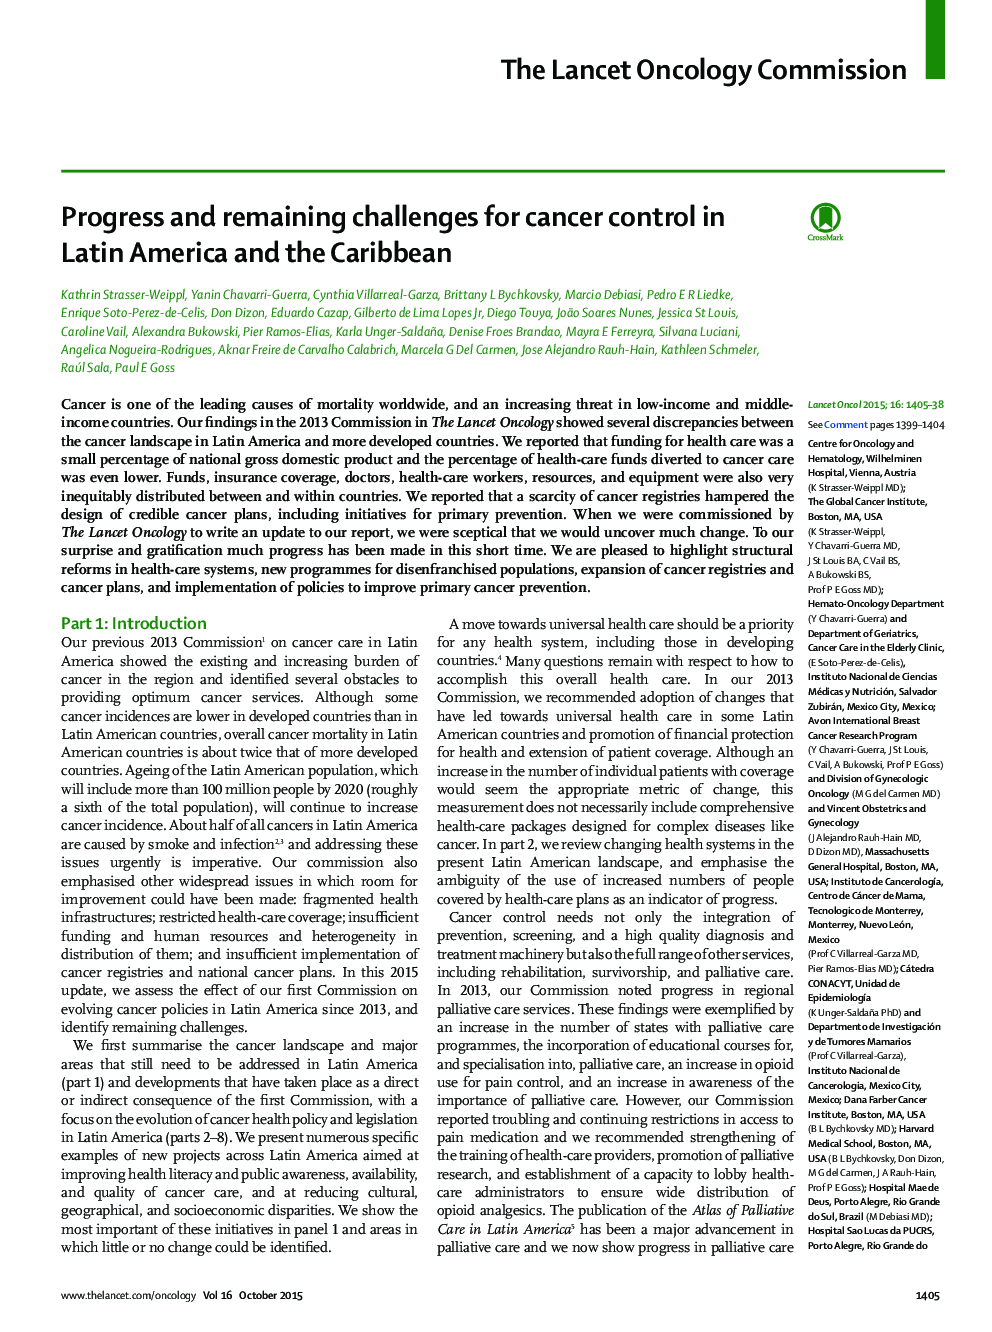 Progress and remaining challenges for cancer control in Latin America and the Caribbean